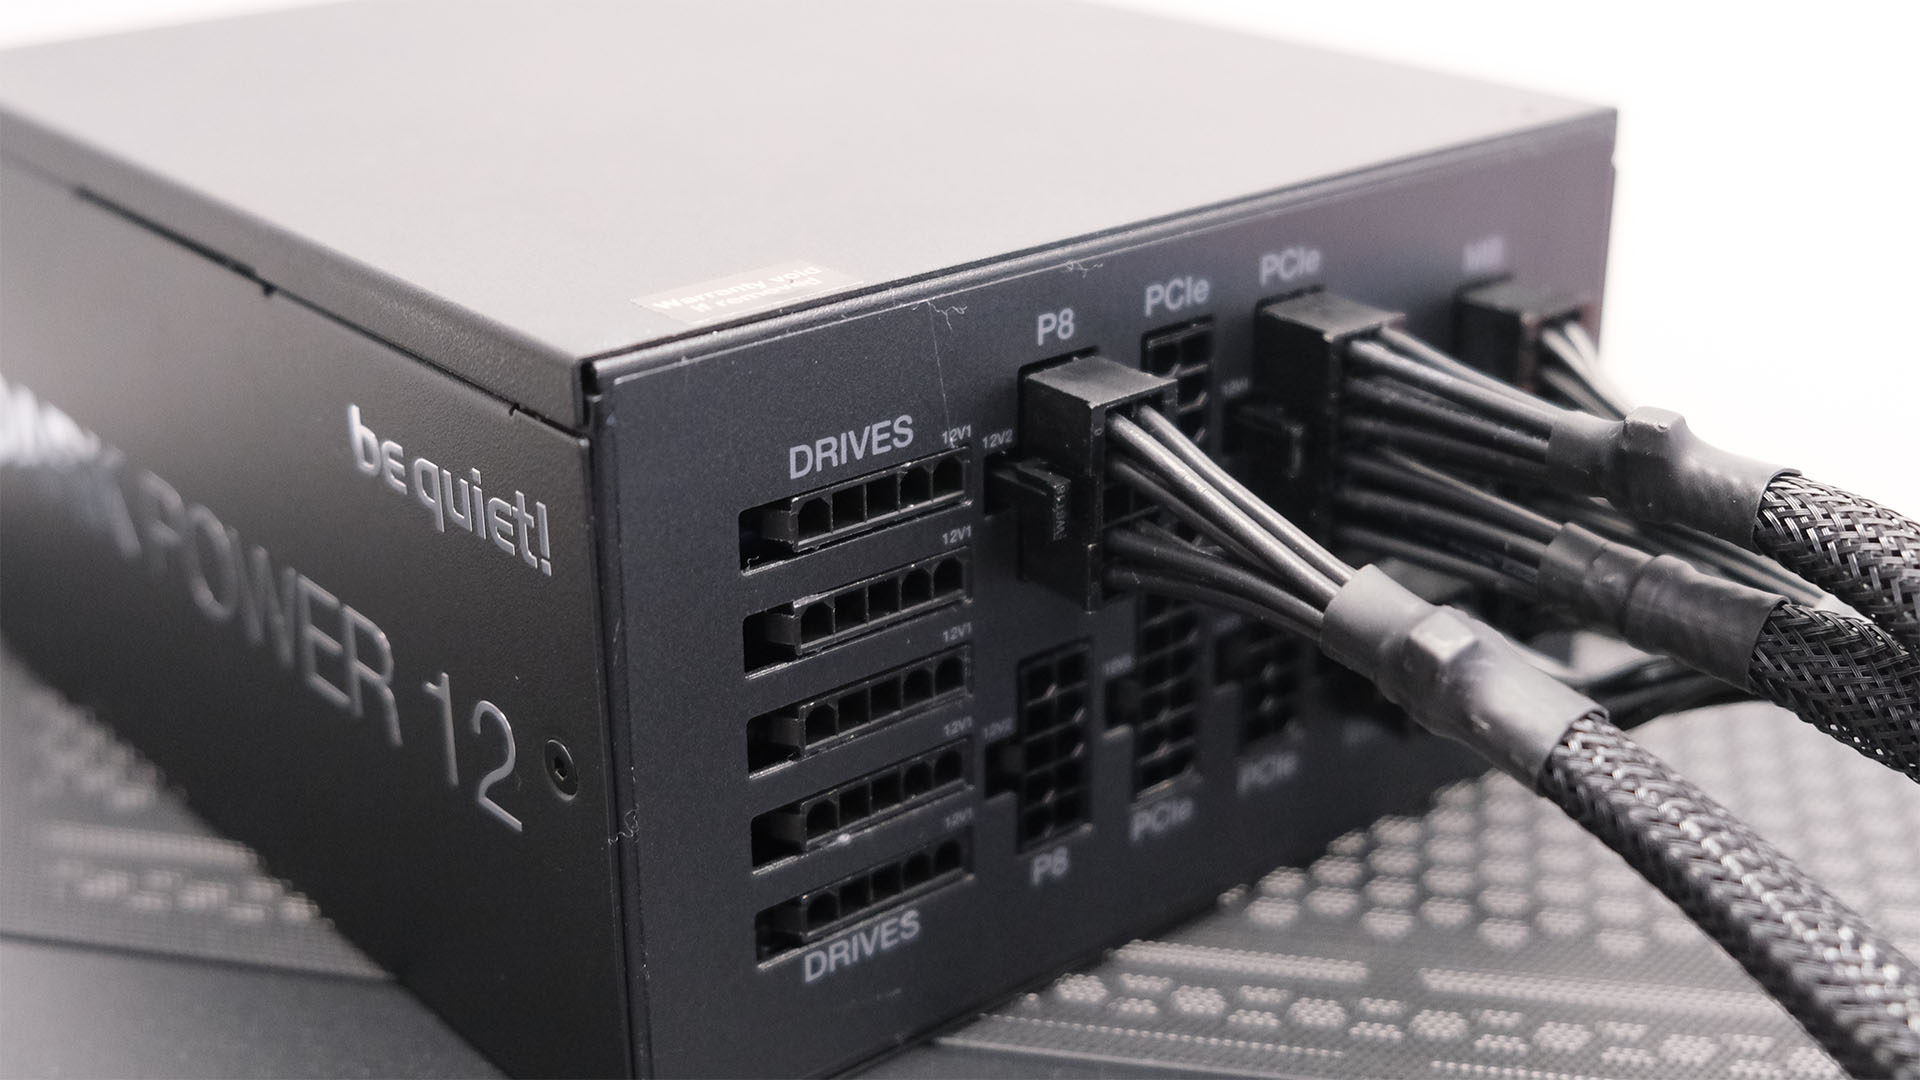 Cable management guide: Only use necessary PSU cables